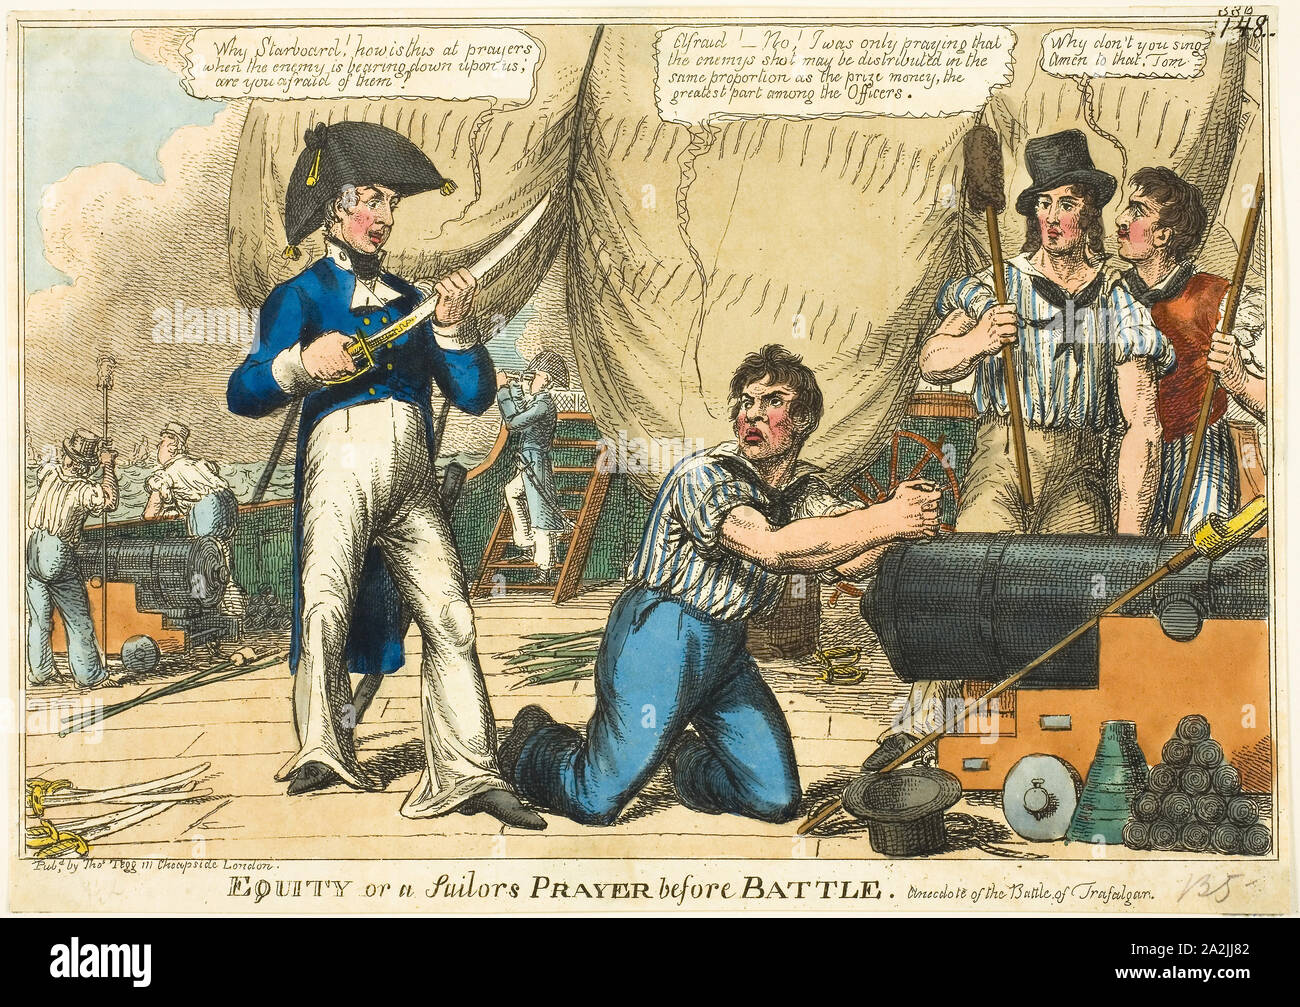 Equity, or a Sailor’s Prayer before Battle, 1805, Charles Williams (English, active 1797-1830), published by Thomas Tegg (English, 1776-1845), England, Hand-colored etching on ivory wove paper, 255 × 355 mm Stock Photo